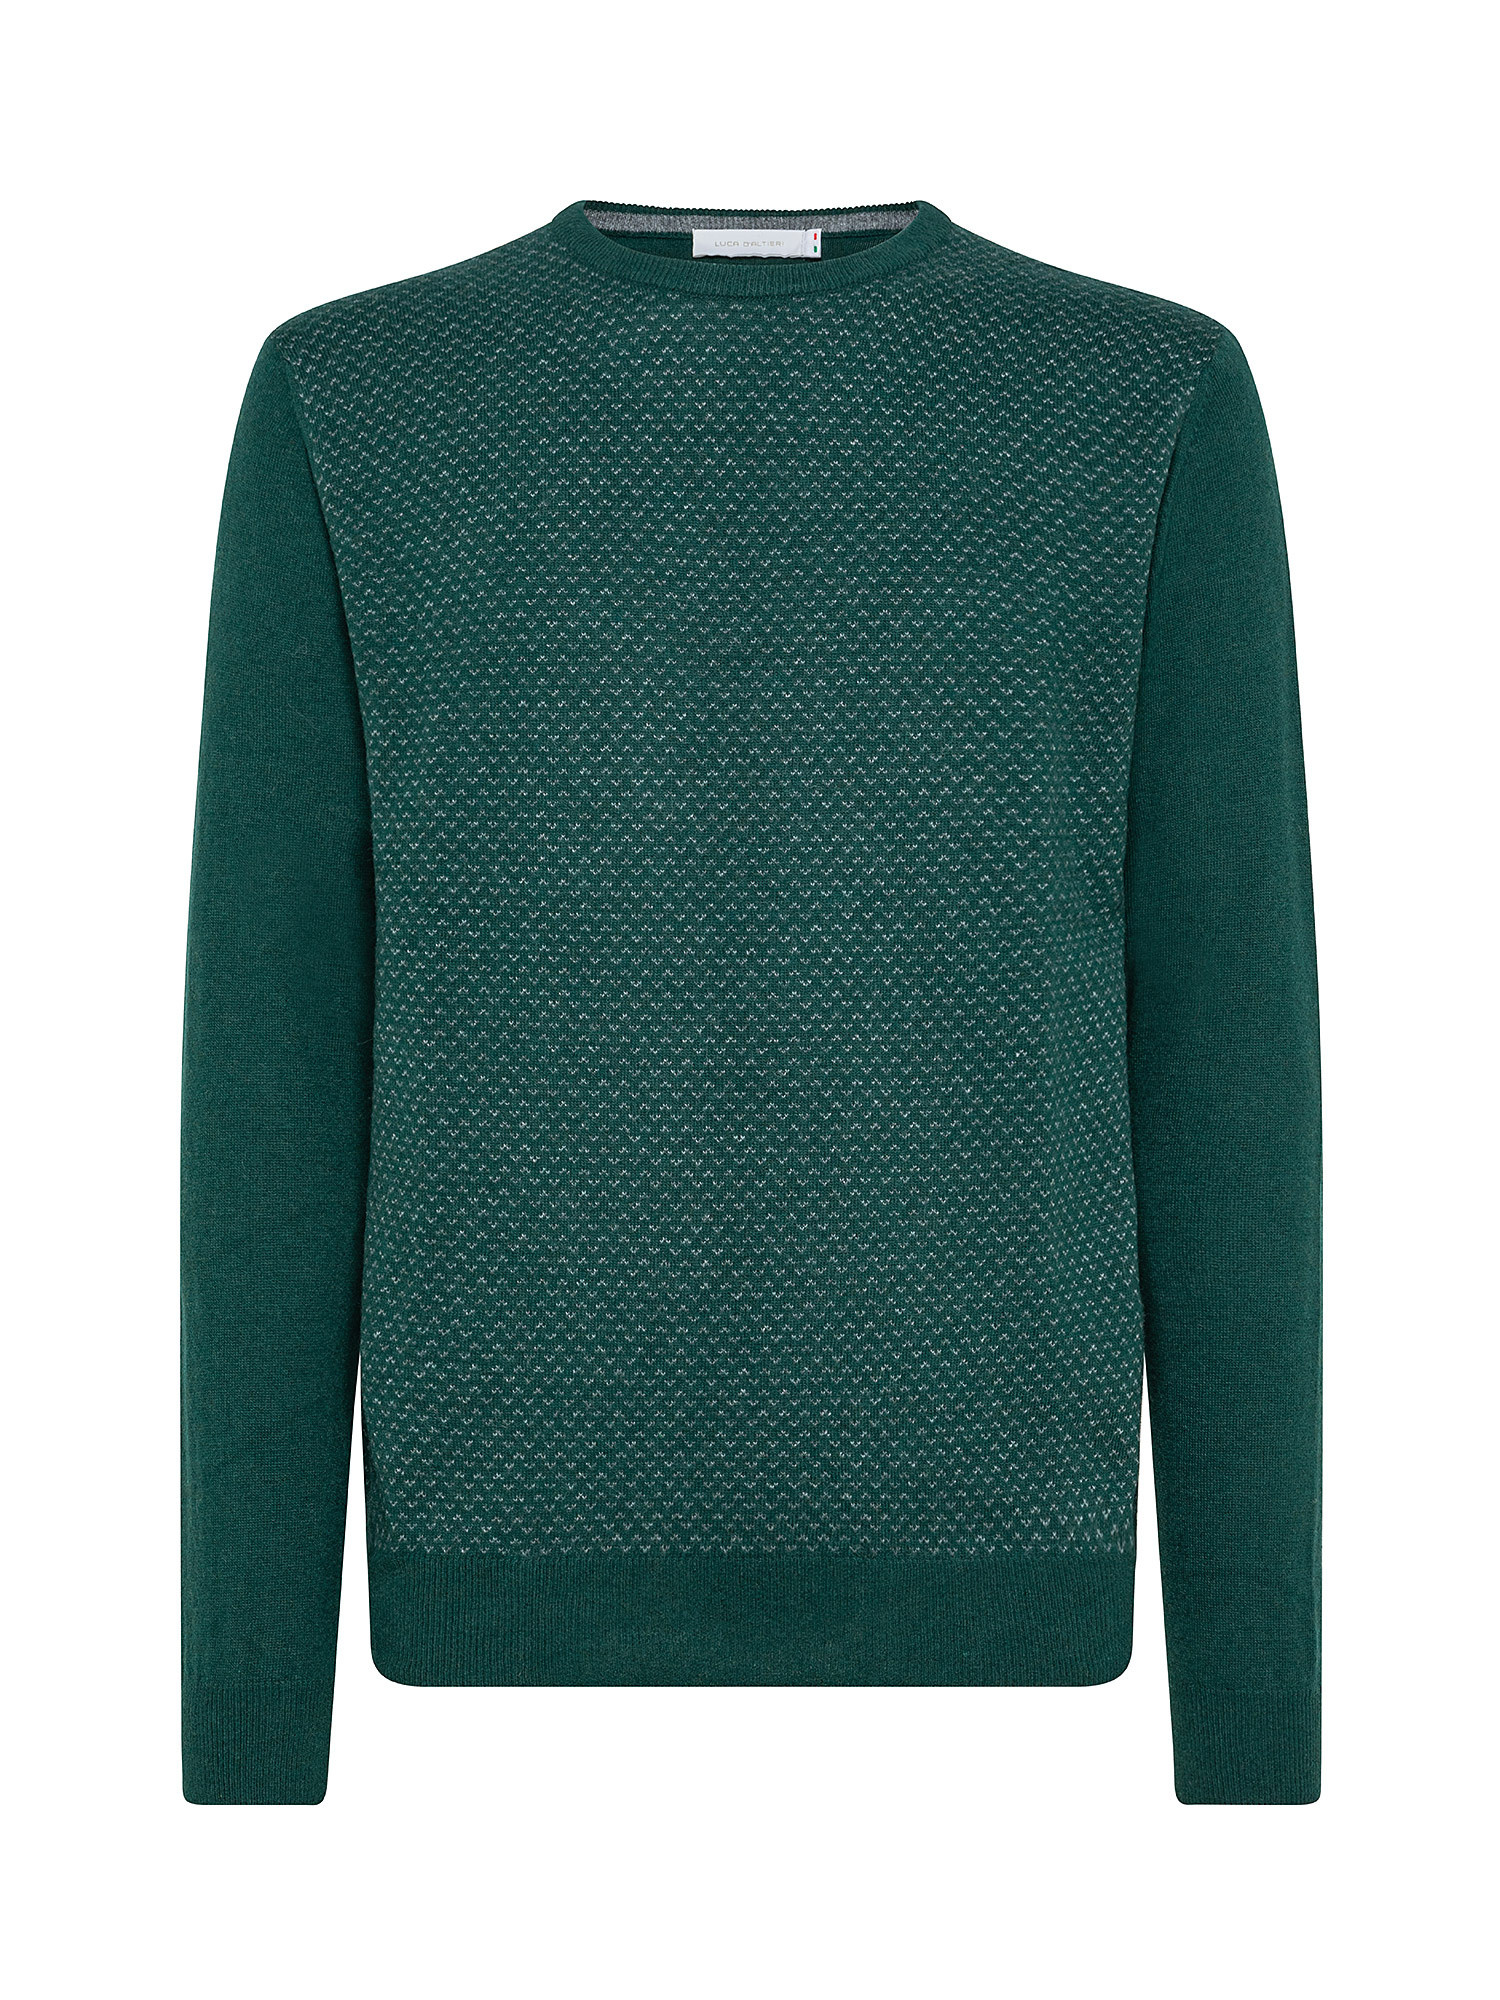 Pullover girocollo basic, Verde, large image number 0